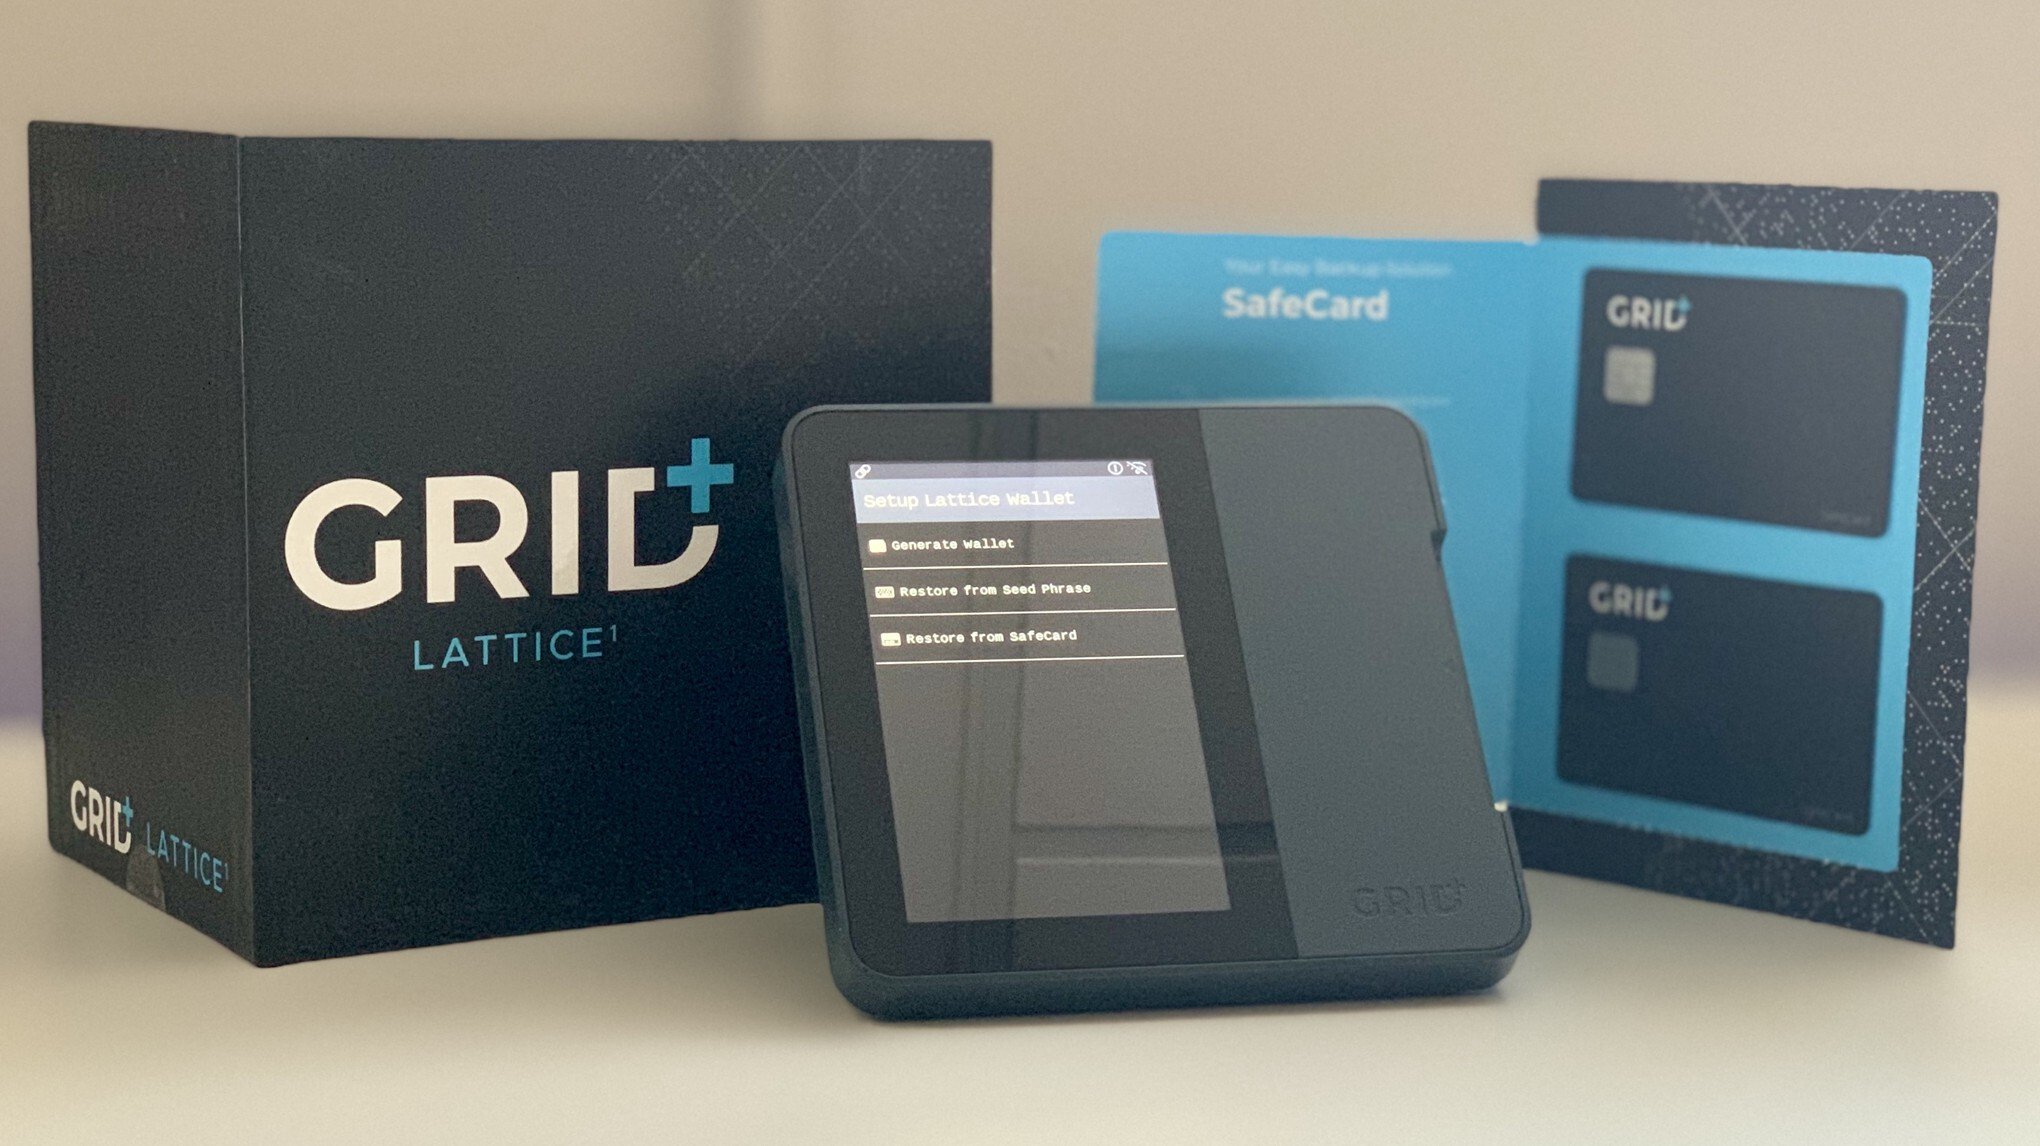 GRID - GridPlus Hardware Wallet - Welcome to the New Age of Crypto Hardware. The New Standart for Hardware Wallets. With unique hardware security features, a large touch screen, and wireless connectivity, the GridPlus Lattice1 is a programmable hardware wallet that makes using crypto enjoyable while securing your assets against threats of any magnitude